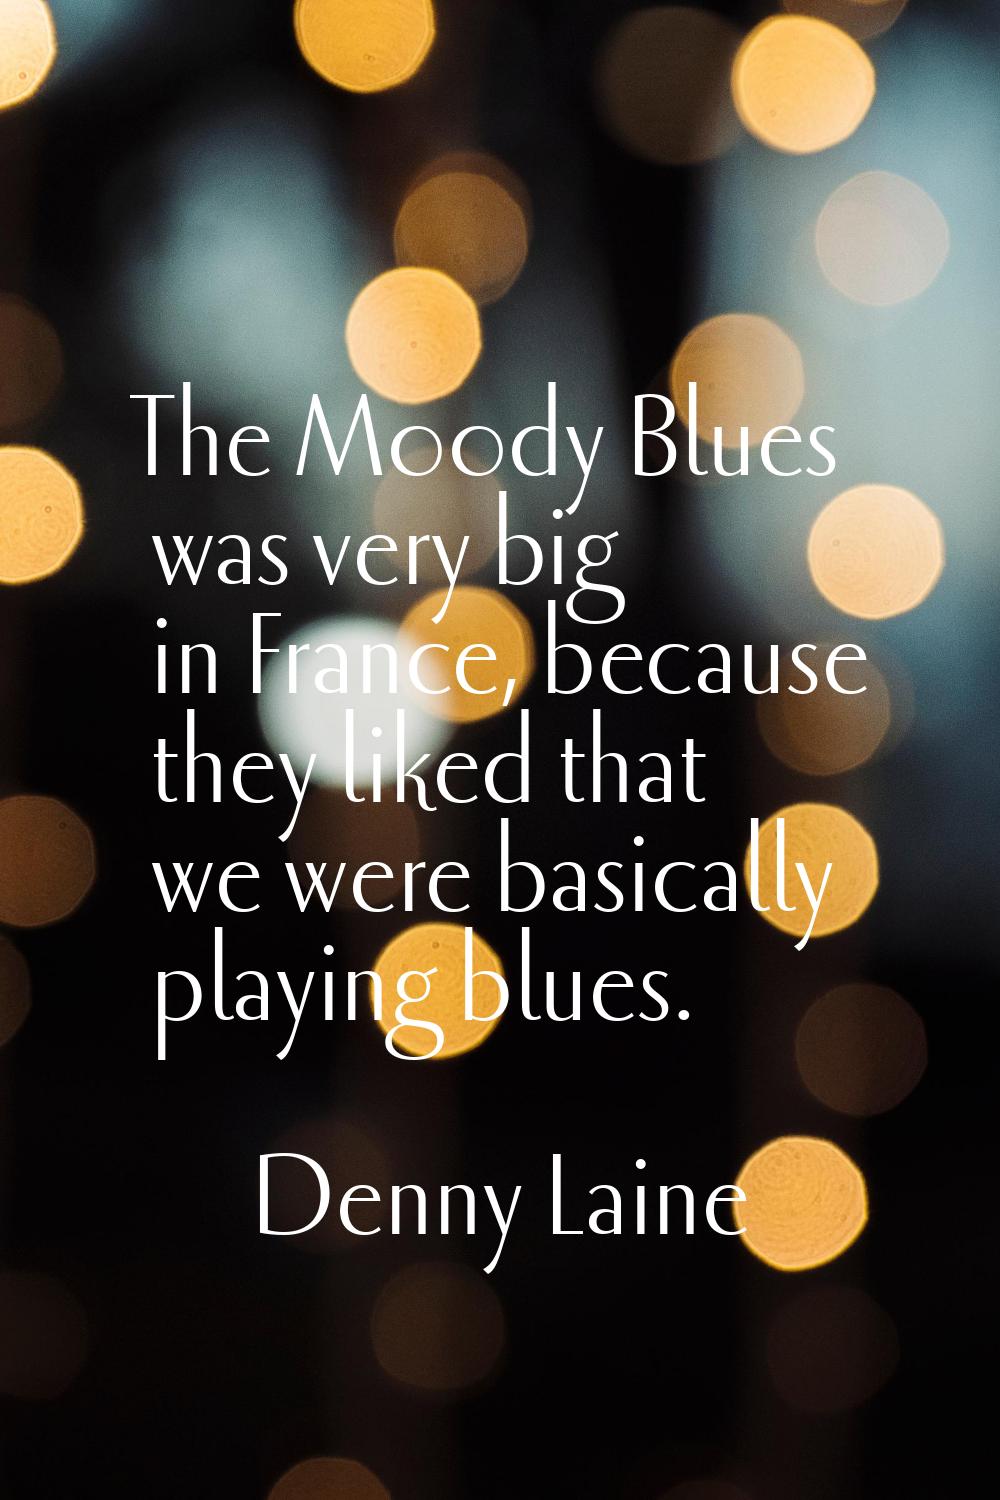 The Moody Blues was very big in France, because they liked that we were basically playing blues.